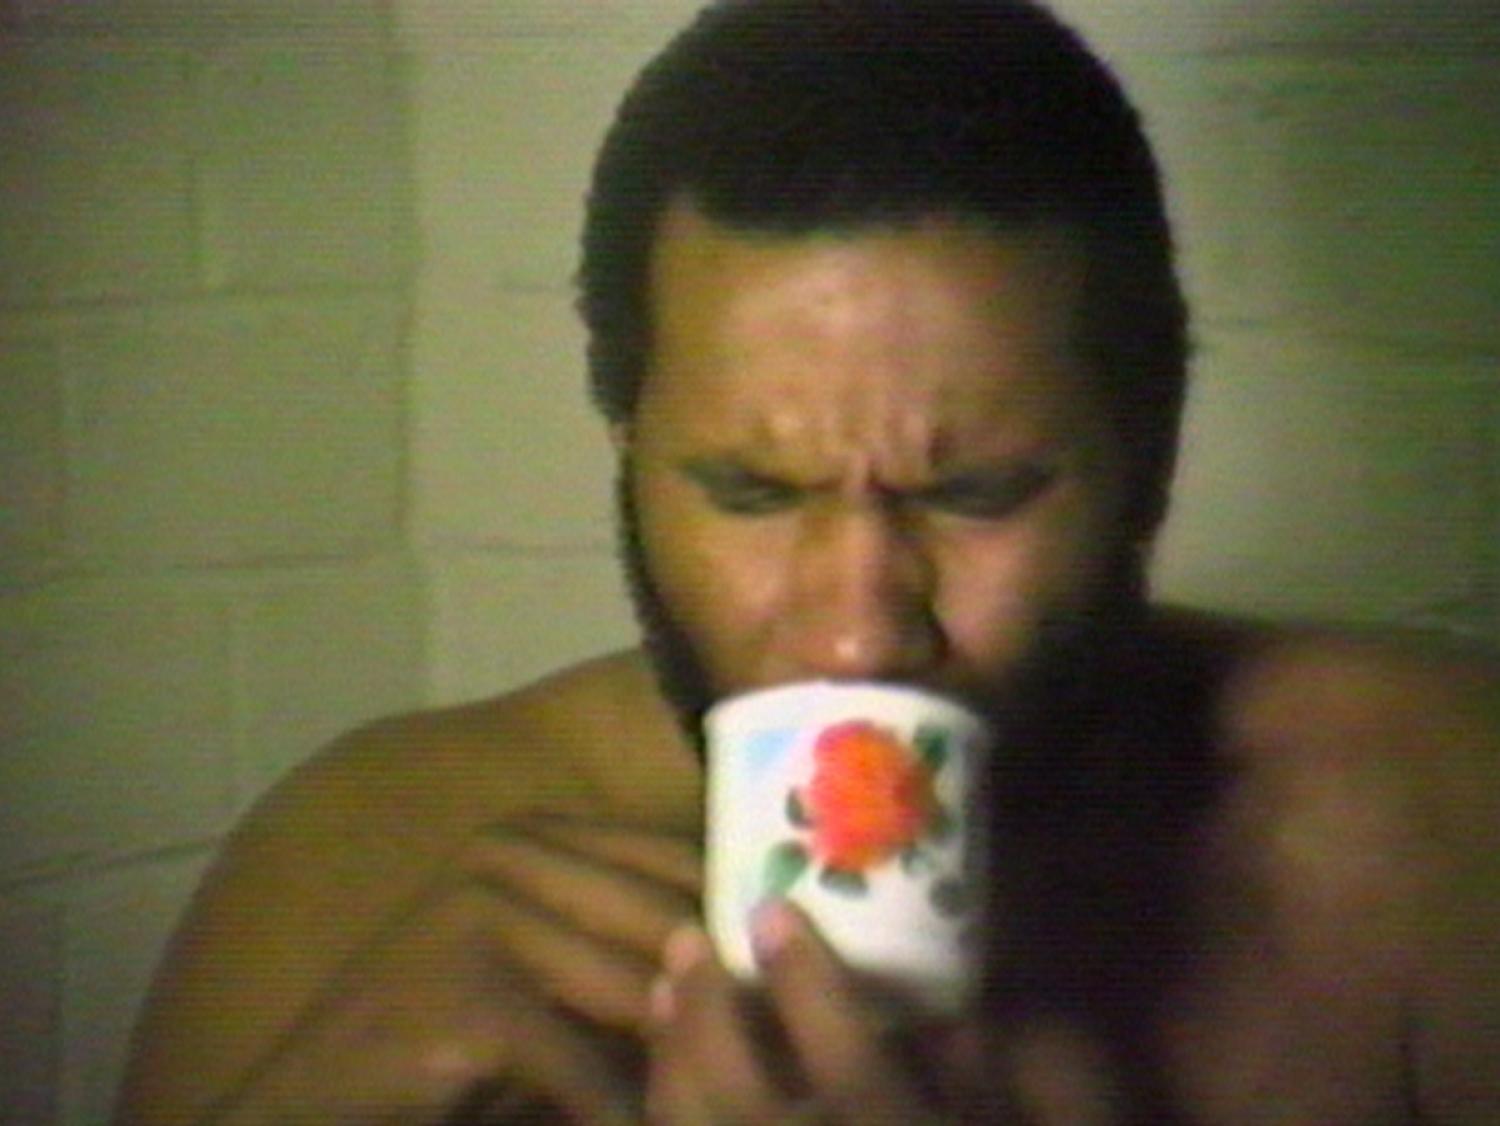 Ulysses Jenkins, <i>Inconsequential Doggereal</i>, 1981. Video transferred to DVD, color, sound. 15:18 min. Courtesy of the artist and Electronic Arts Intermix (EAI). New York.